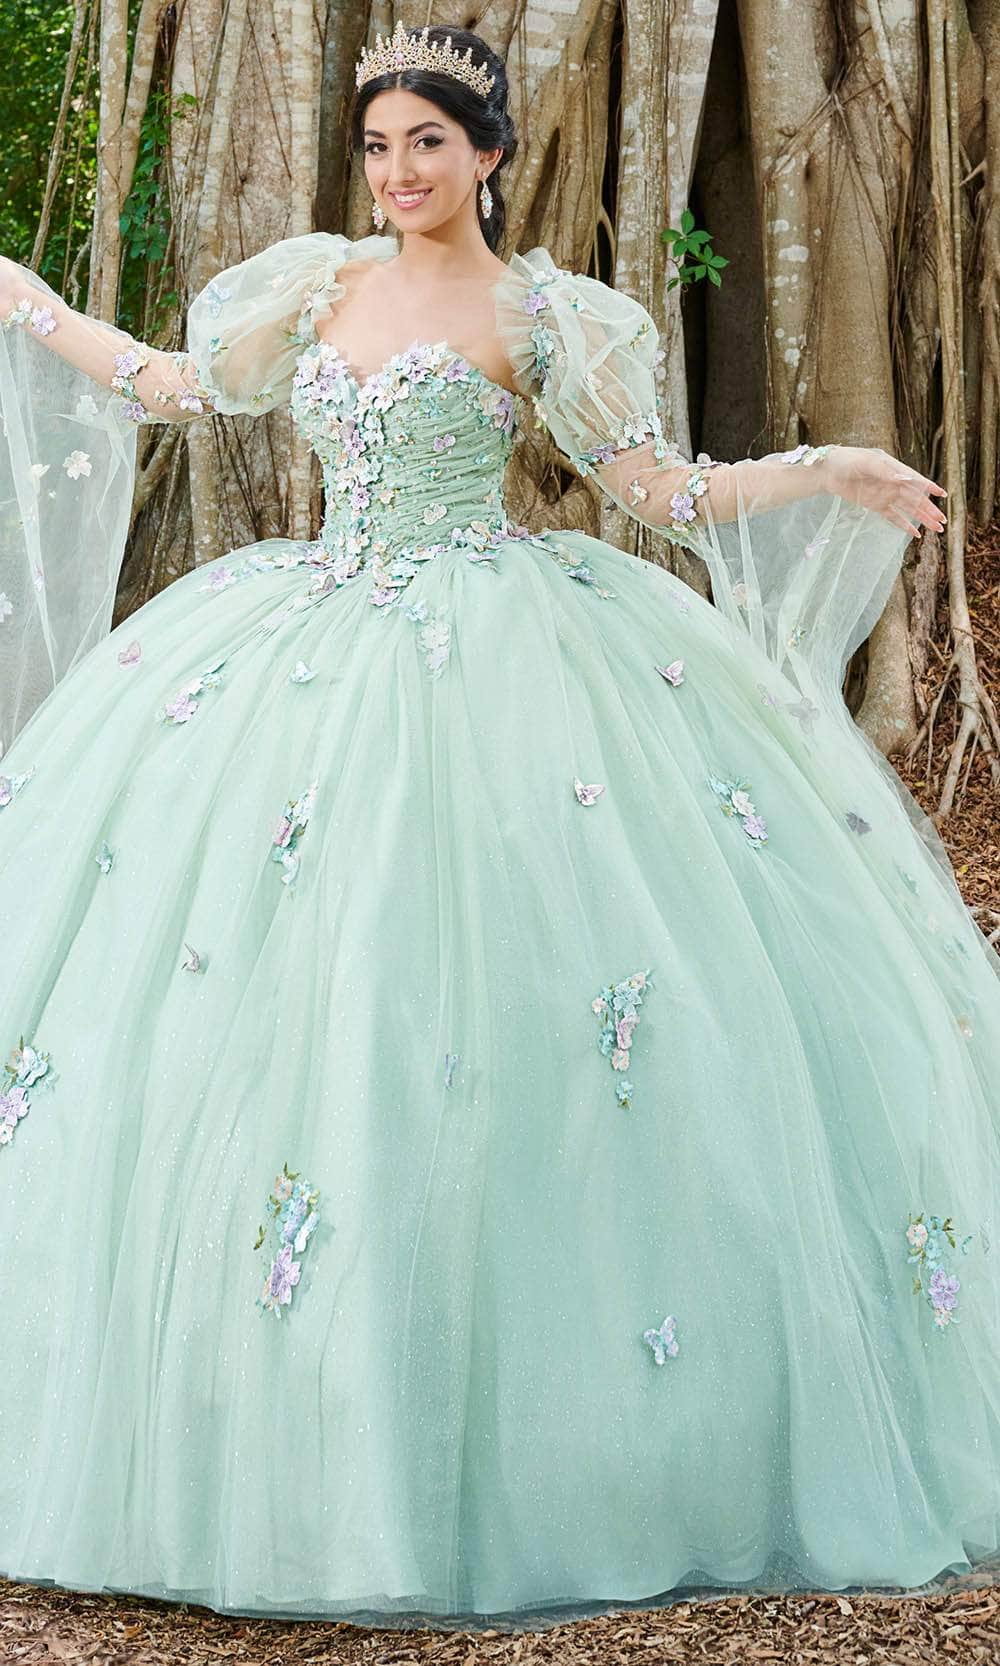 Image of Fiesta Gowns 56500 - 3D Floral Applique Sweetheart Ballgown